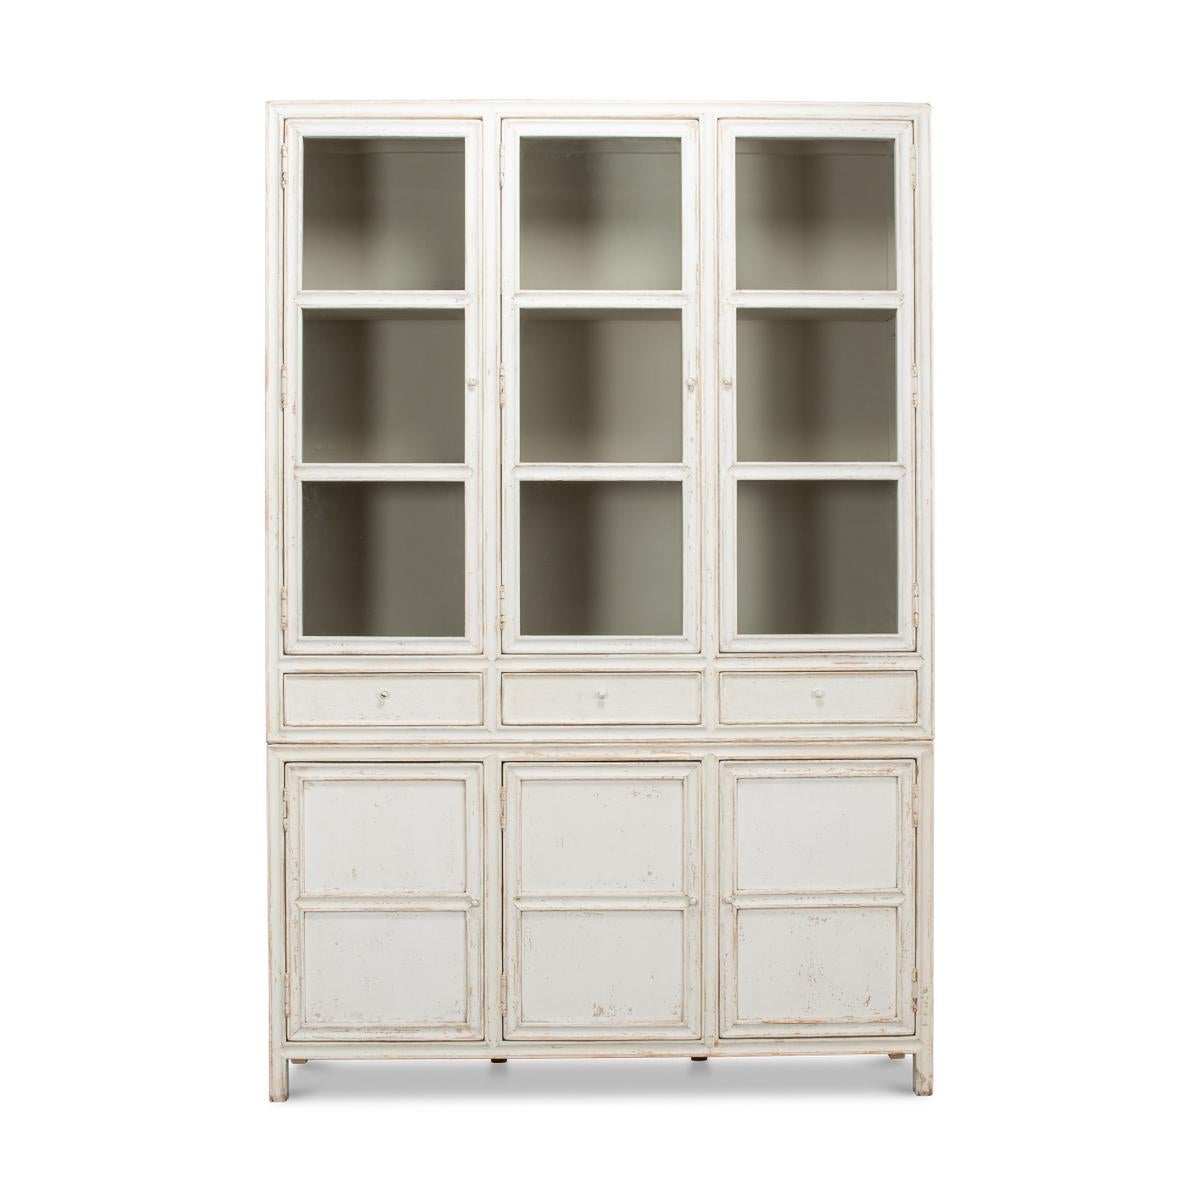 The Country painted display cabinet is made with reclaimed pine and has a hand-rubbed white painted antiqued distressed finish. The upper section with three glass doors above three drawers sitting atop three enclosed cabinets below.

Dimensions: